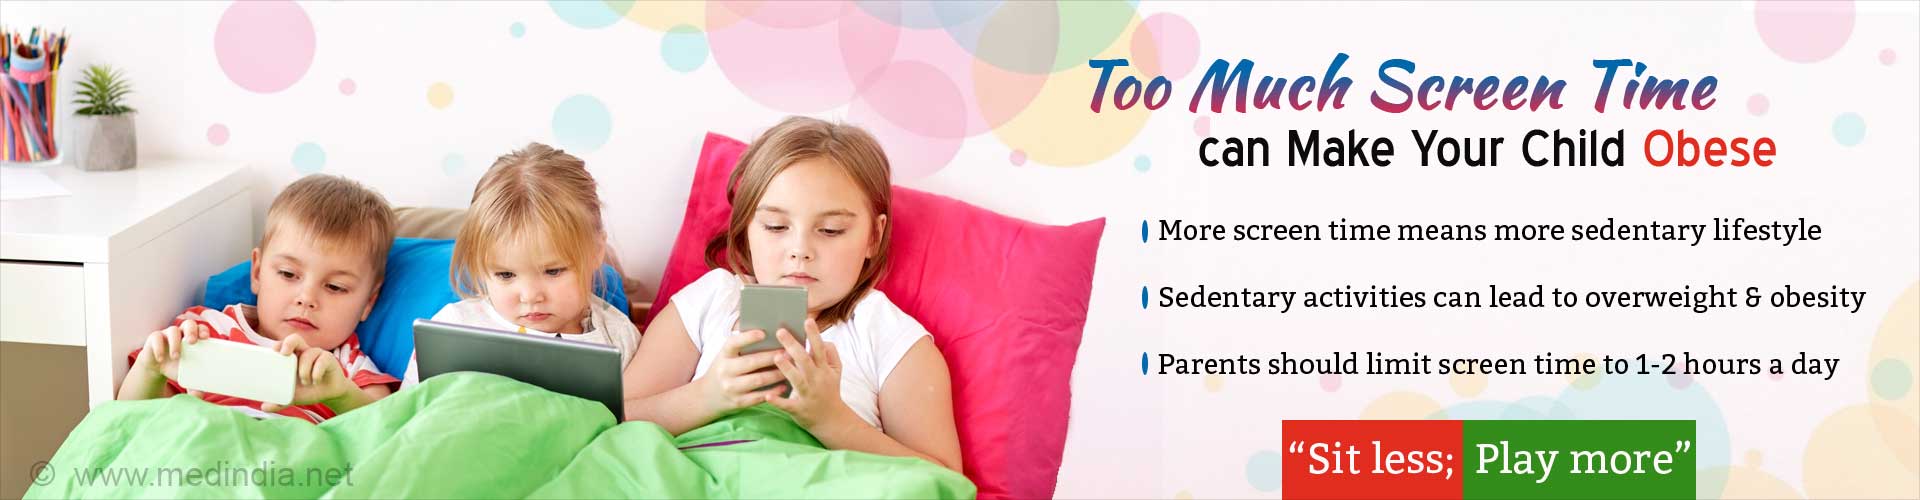 Too much screen time can make your child obese. More screen time means more sedentary lifestyle. Sedentary activities can lead to overweight & obesity. Parents should limit screen time to 1 - 2 hours a day. 